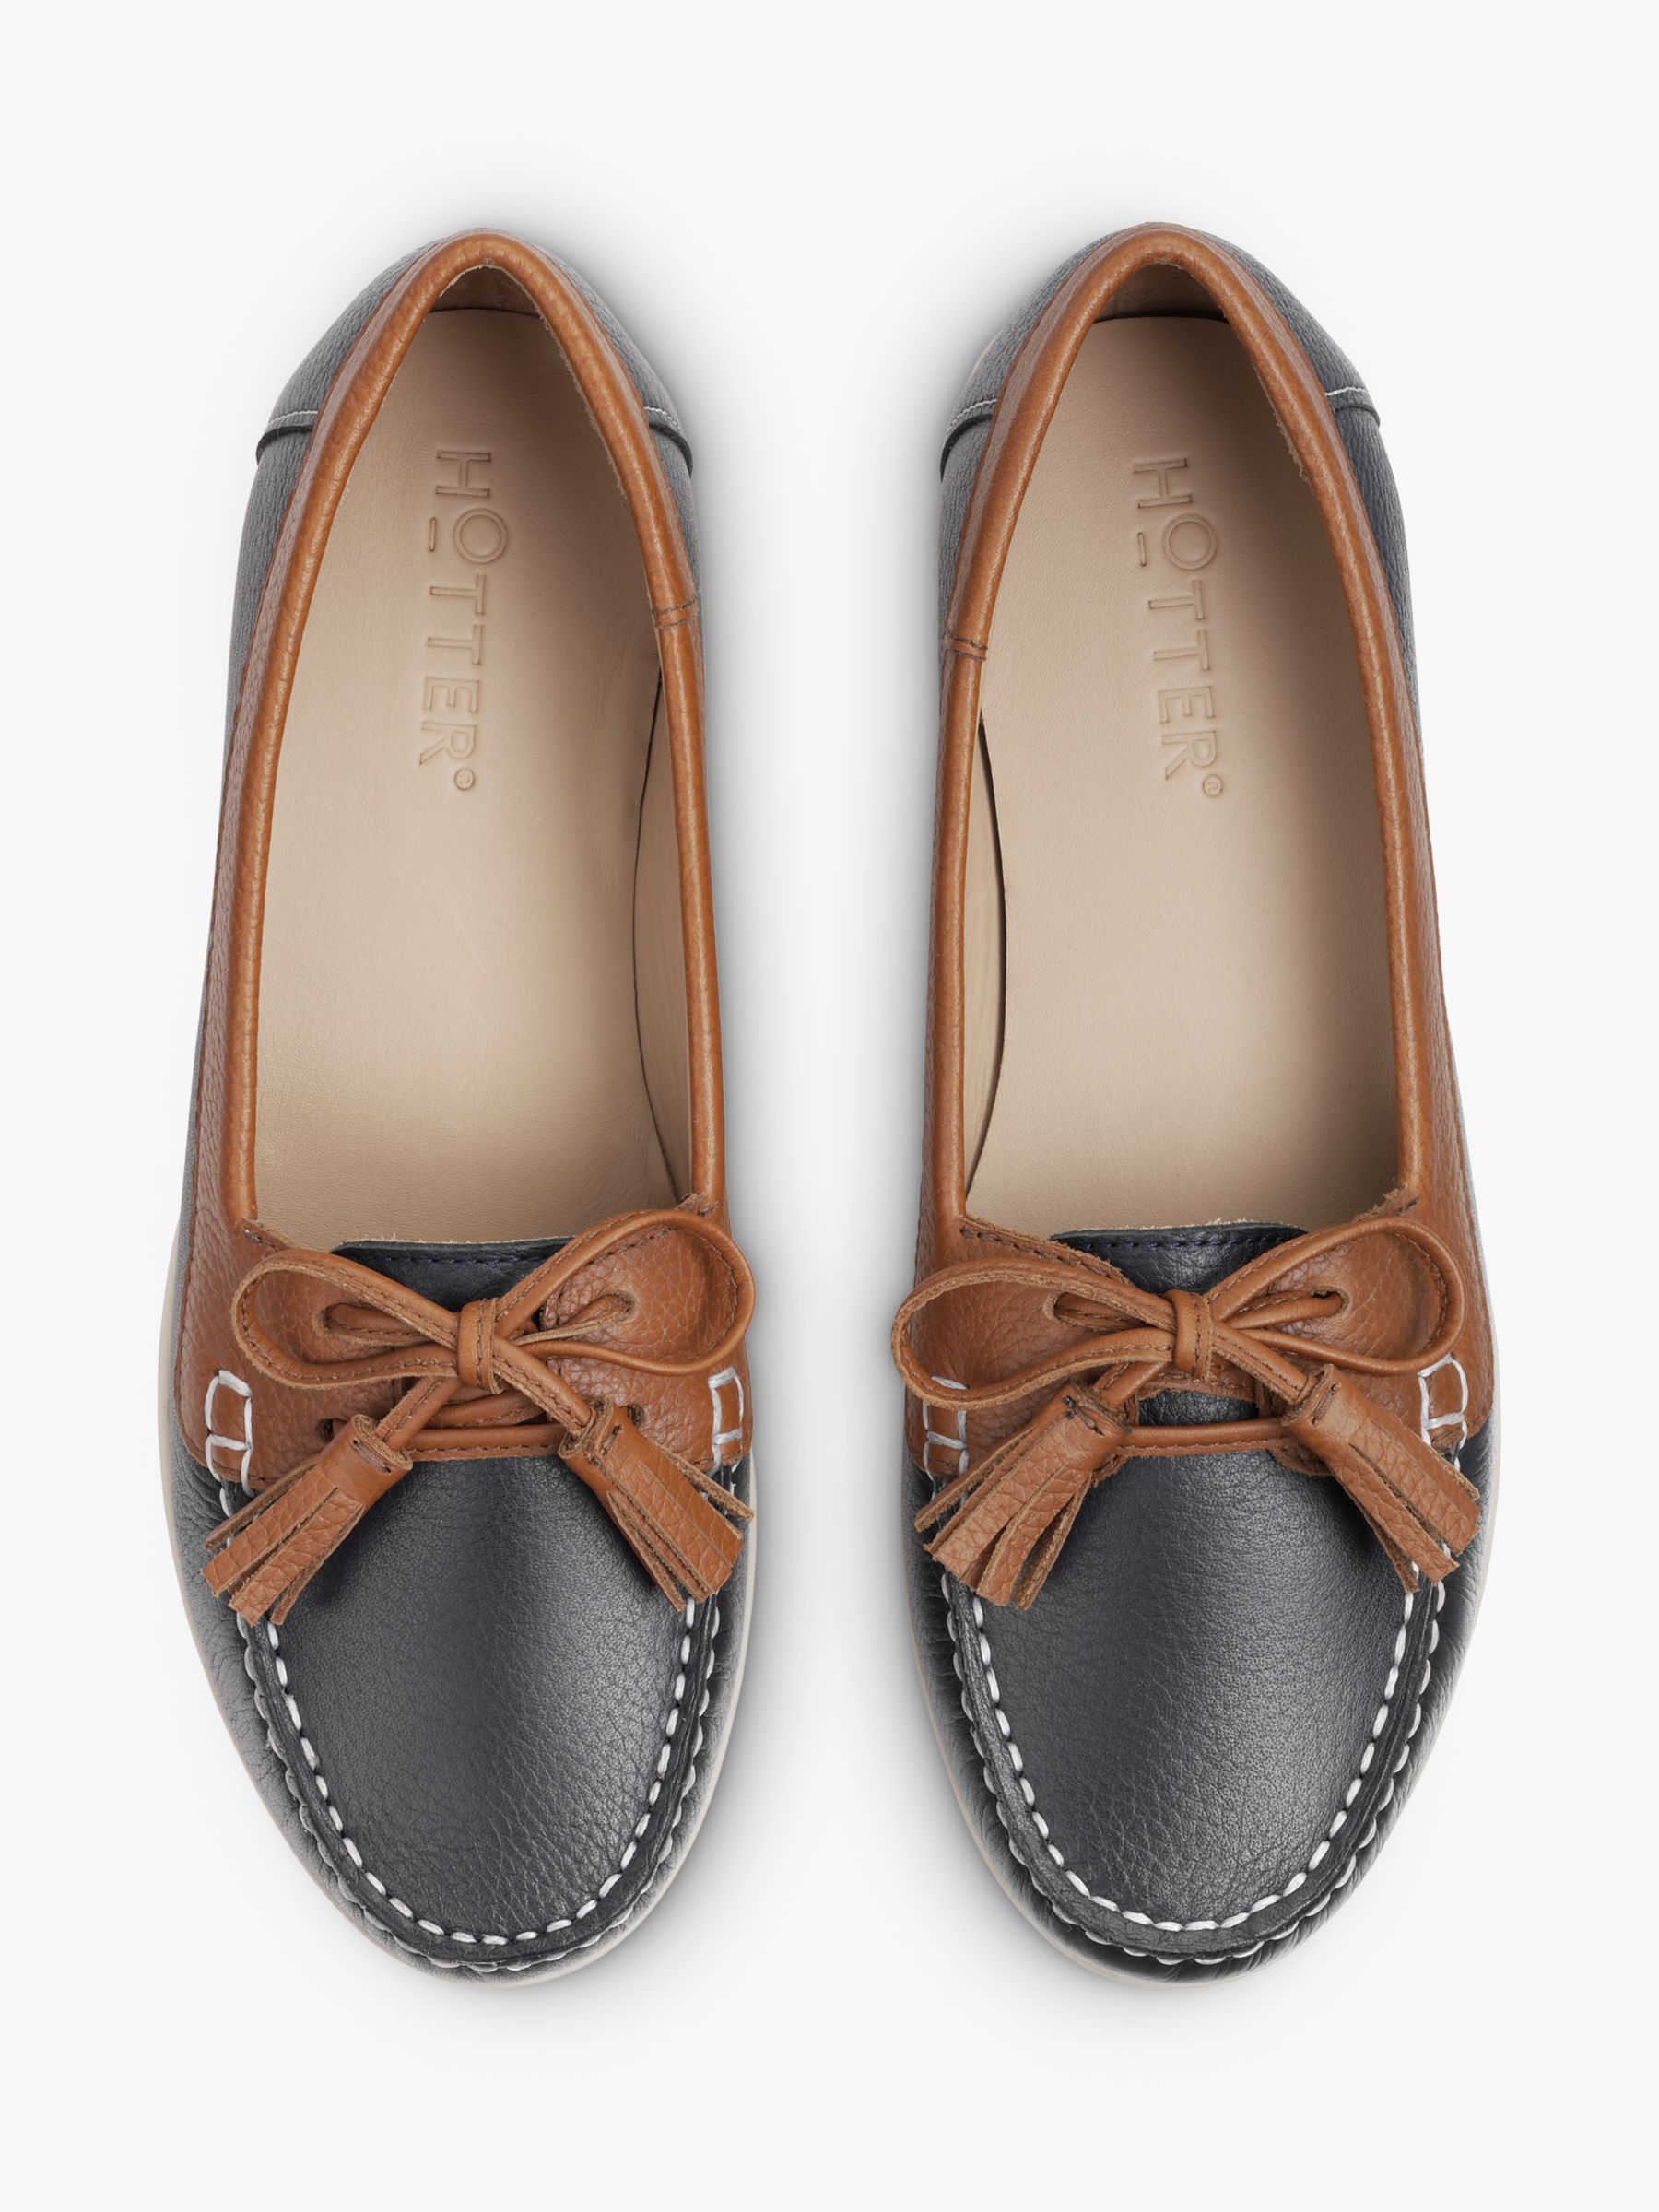 Buy Hotter Bay Wide Fit Leather Moccasin Boat Shoes, Navy/Tan Online at johnlewis.com